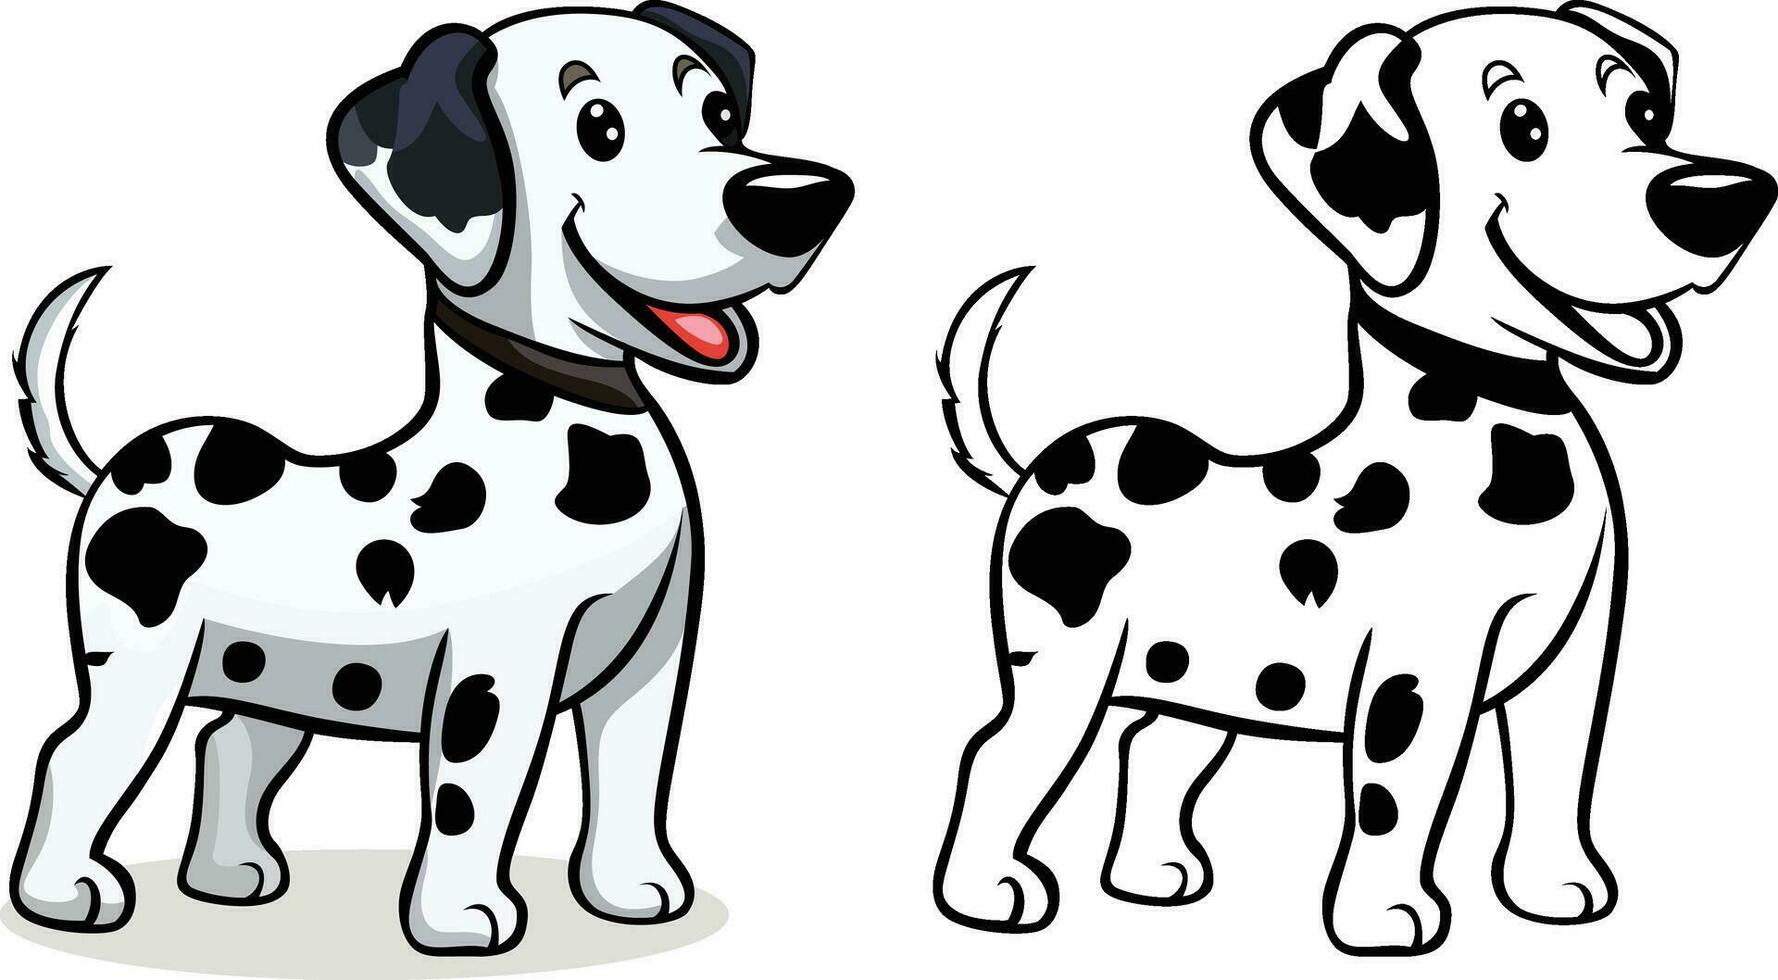 Dalmatian Dog cartoon vector illustration, Happy dalmatian puppy vector image, black and white and colored stock image